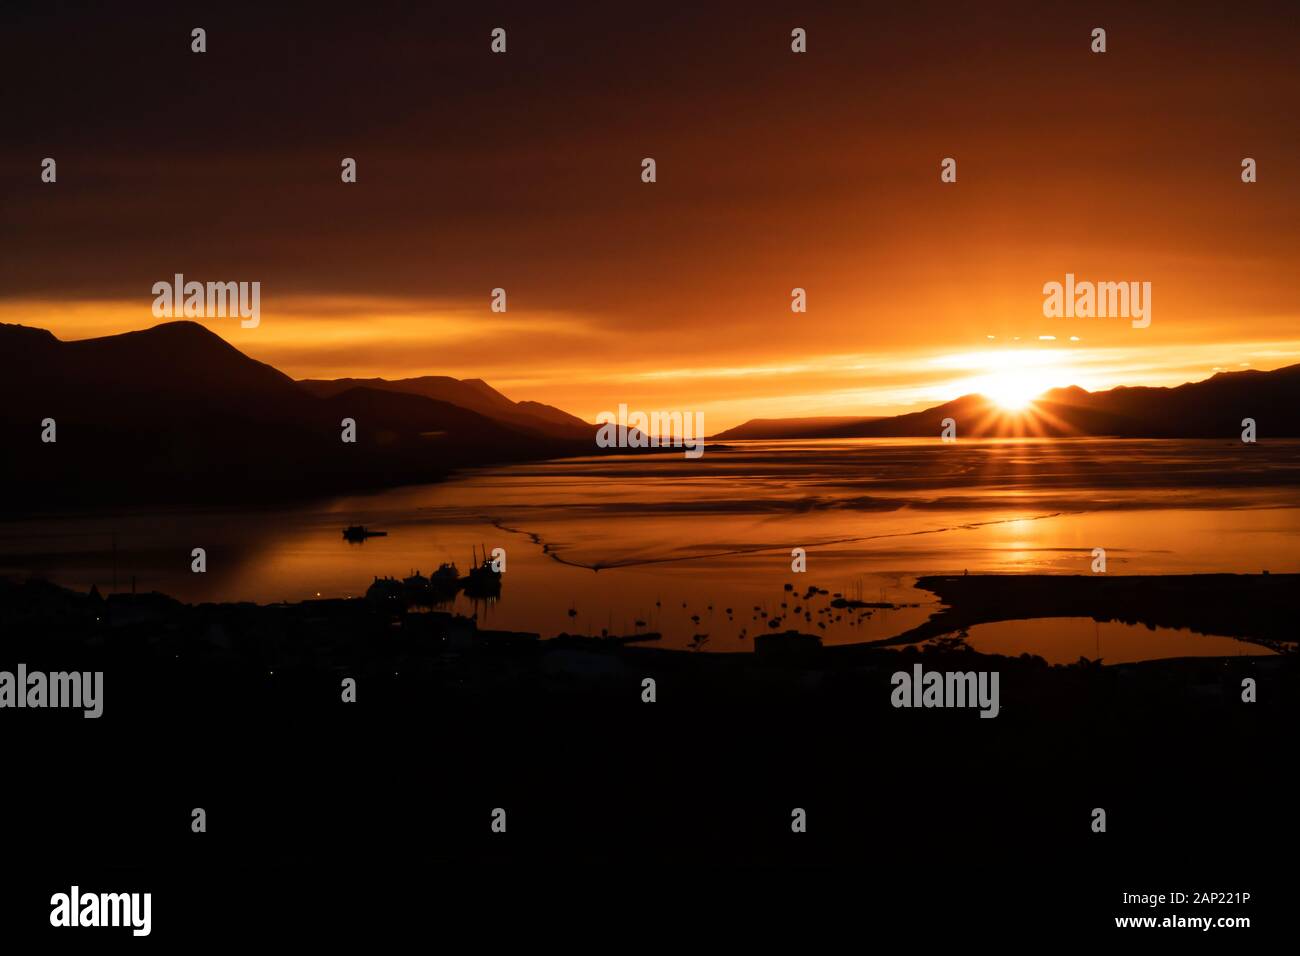 Sunset over the Bay of Ushuaia the southernmost city in the word and the capital of Tierra del Fuego, Antartida e Islas del Atlantico Sur Province, Ar Stock Photo